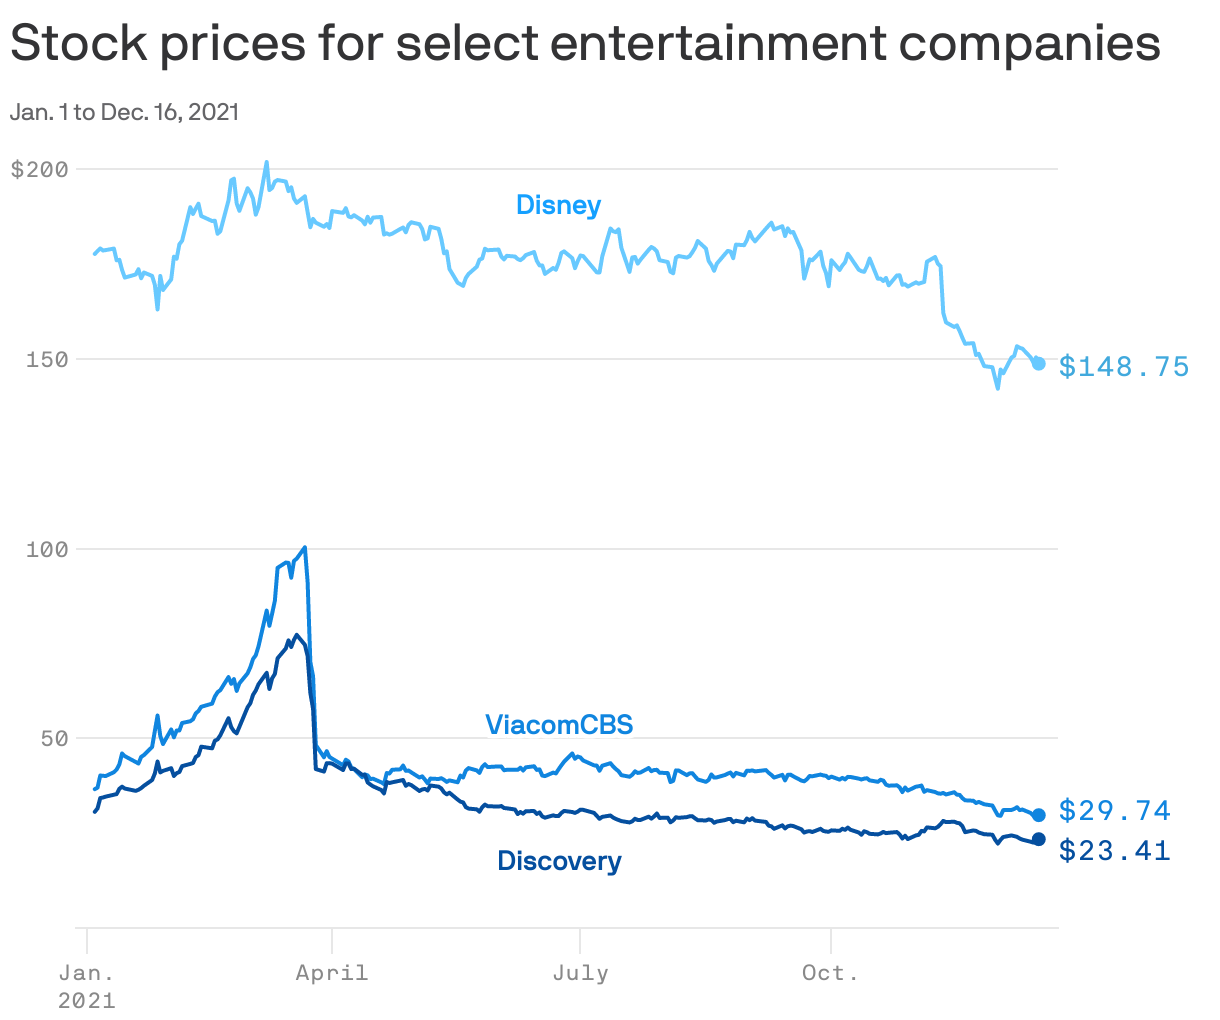 Stock prices for select entertainment companies